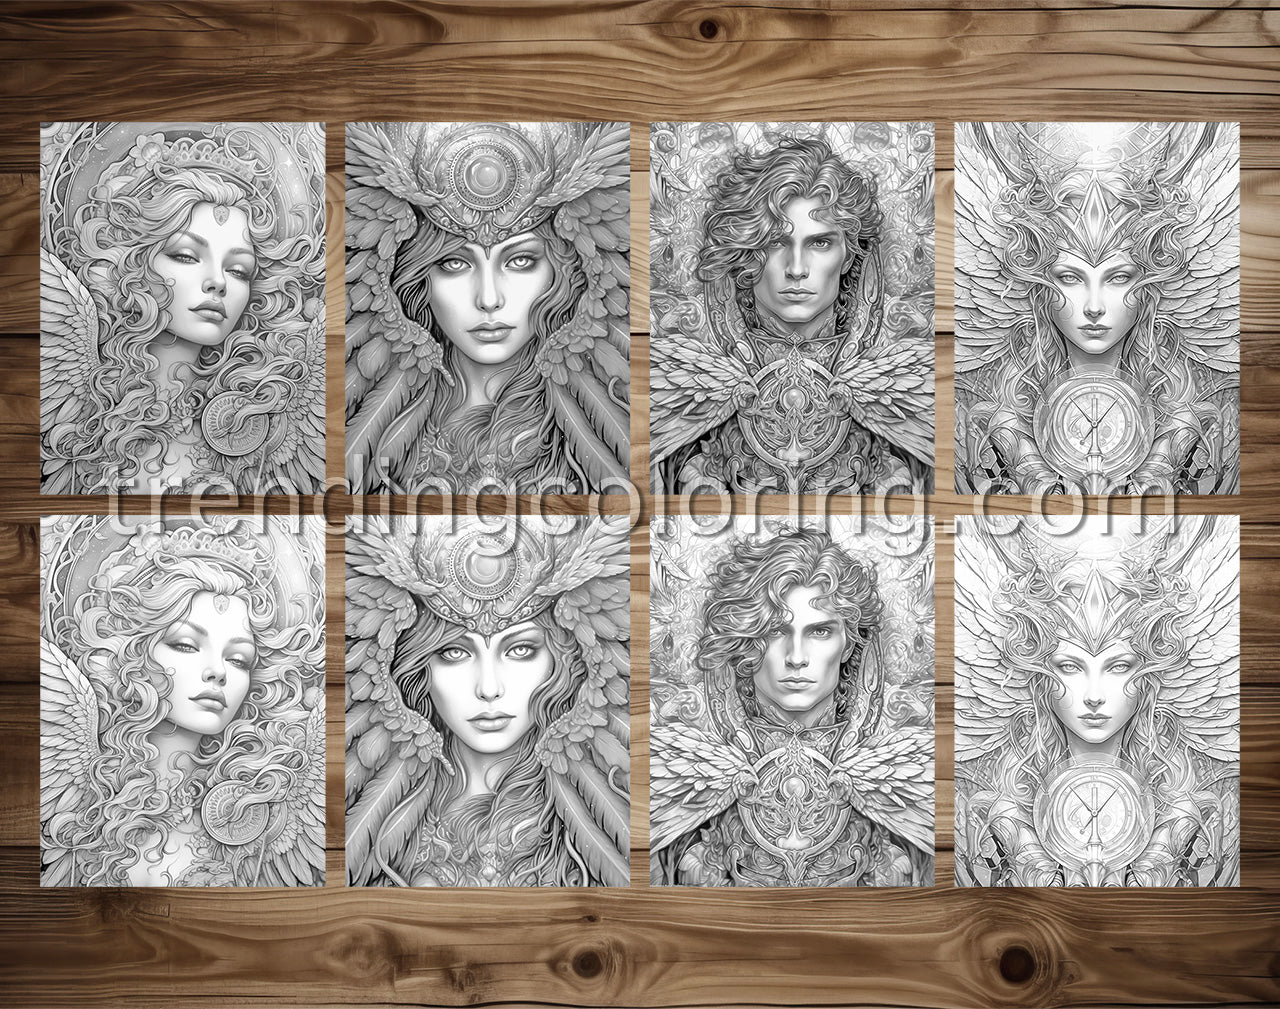 25 Archangels of God Grayscale Coloring Pages - Instant Download - Printable PDF